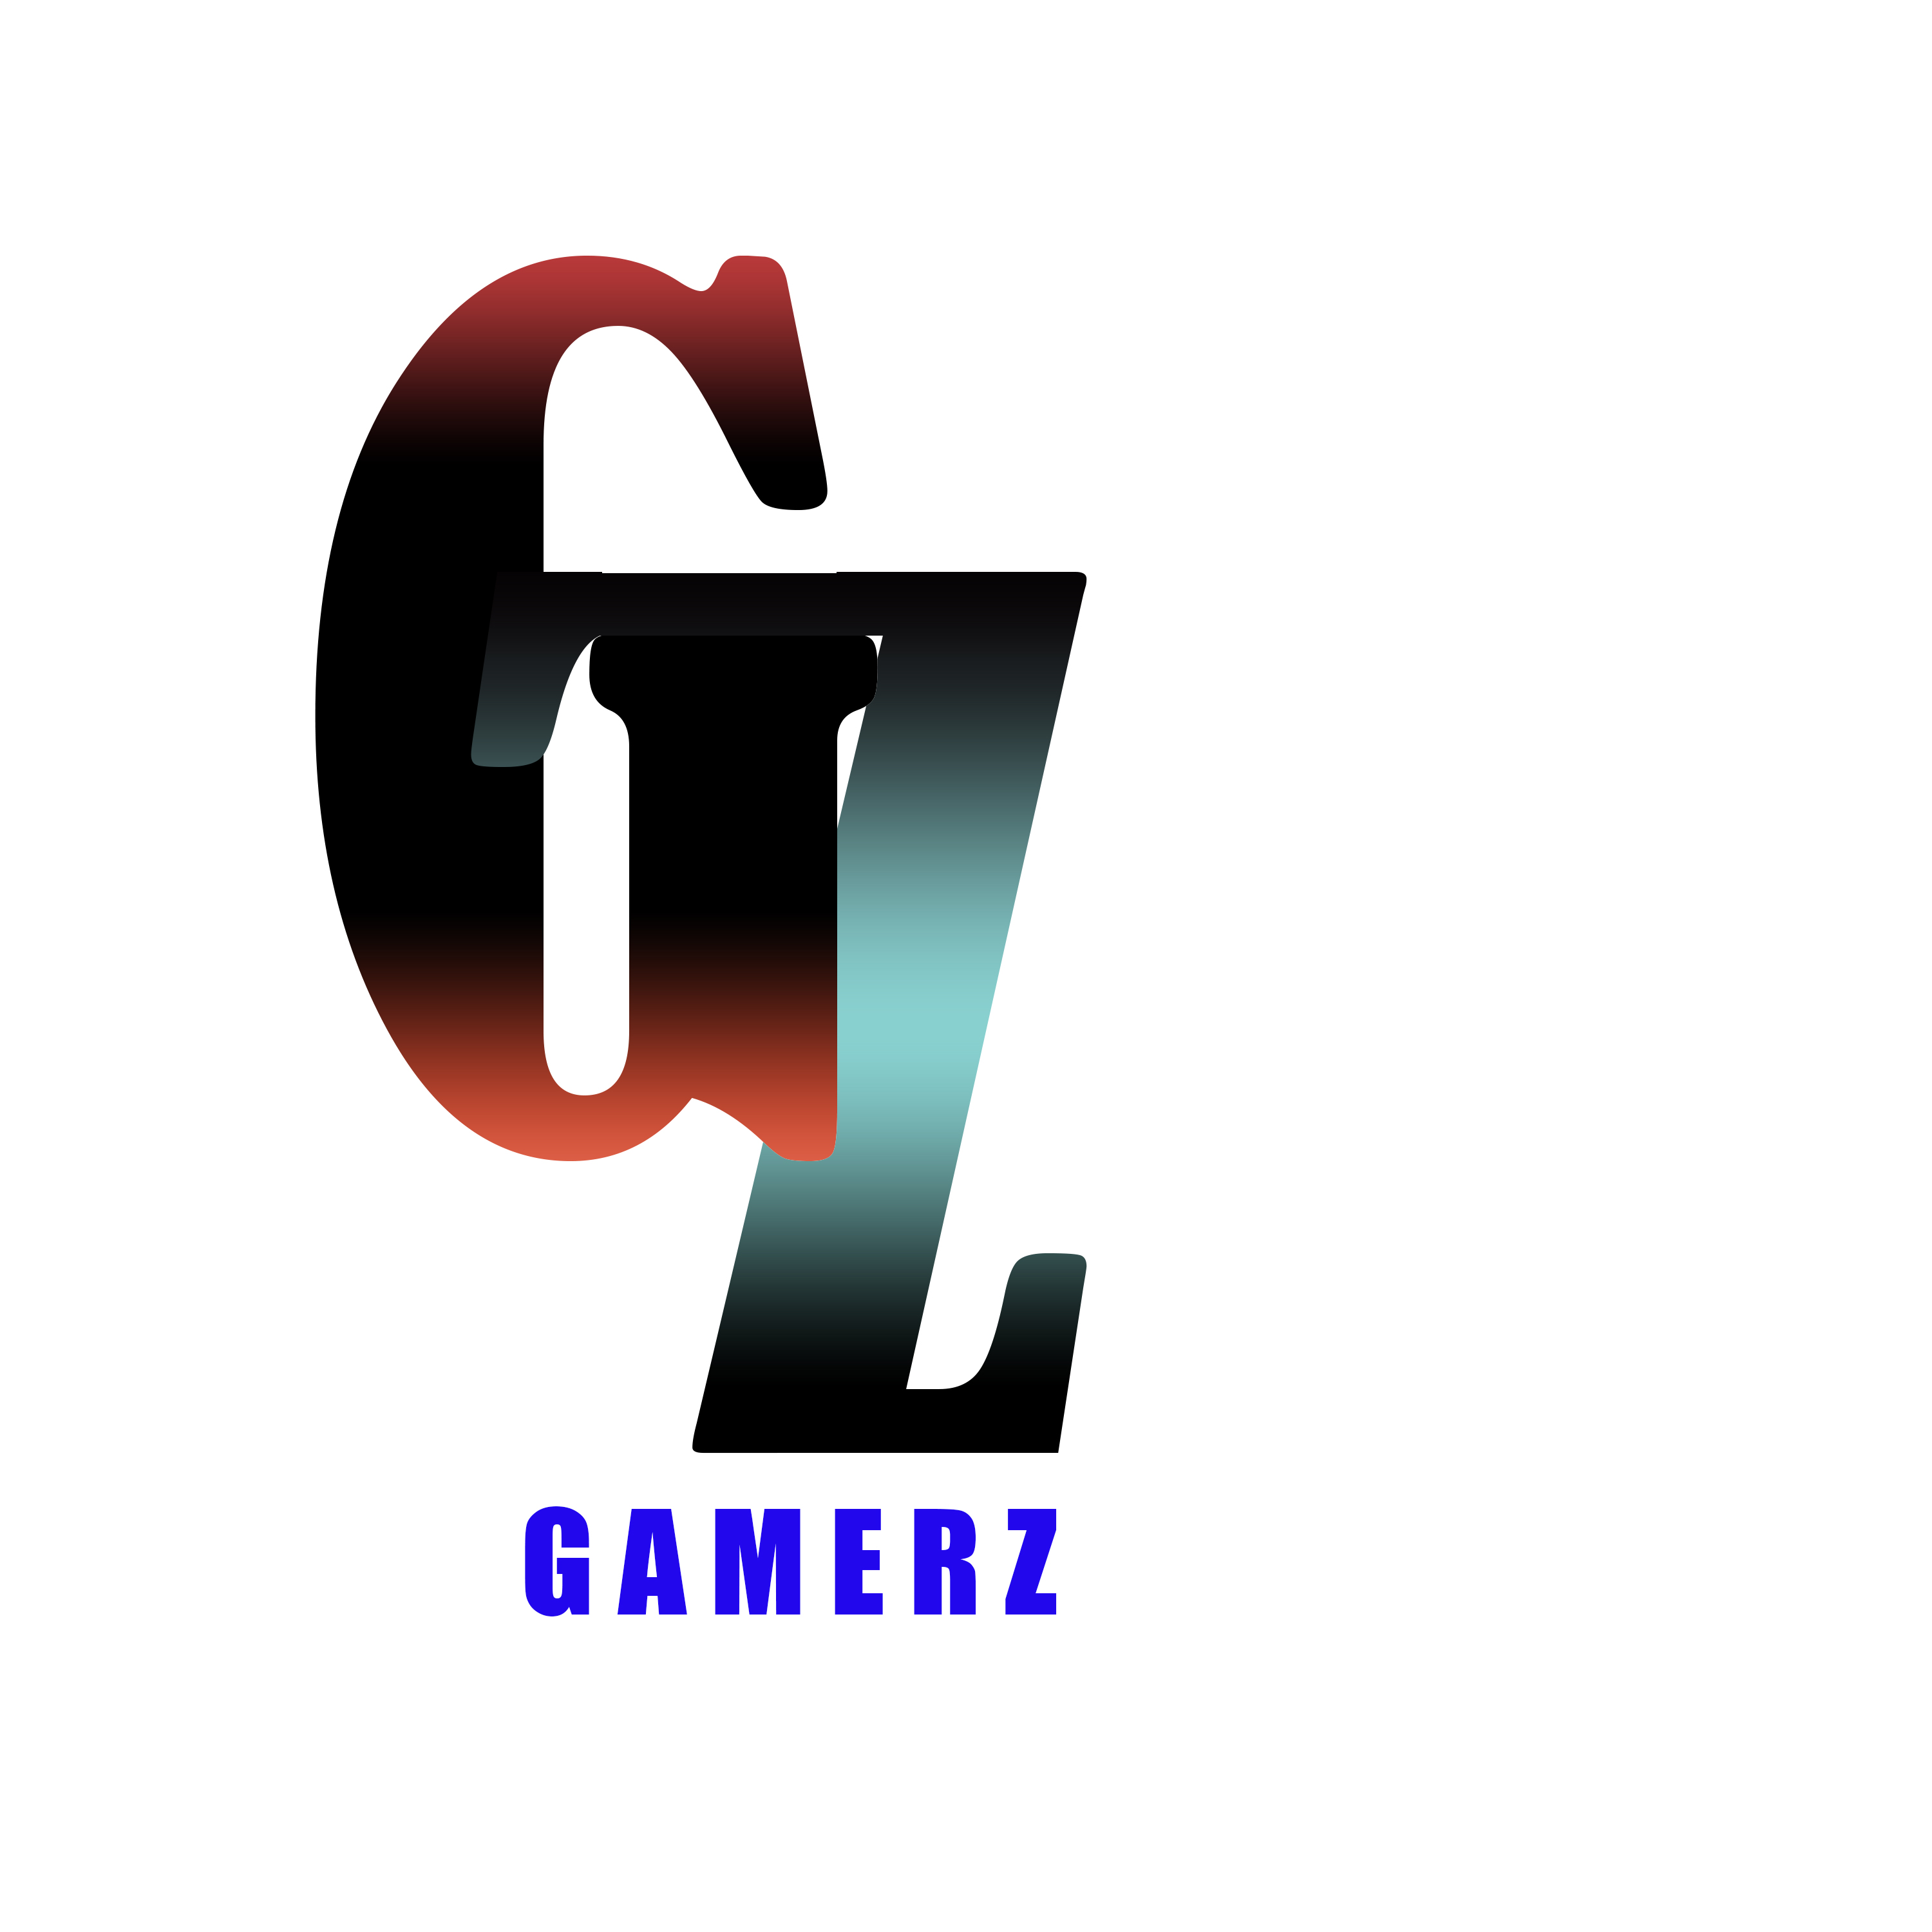 GAMERZ LOGO CREATED ON ONE OF THE BEST SOFTWARE cover image.